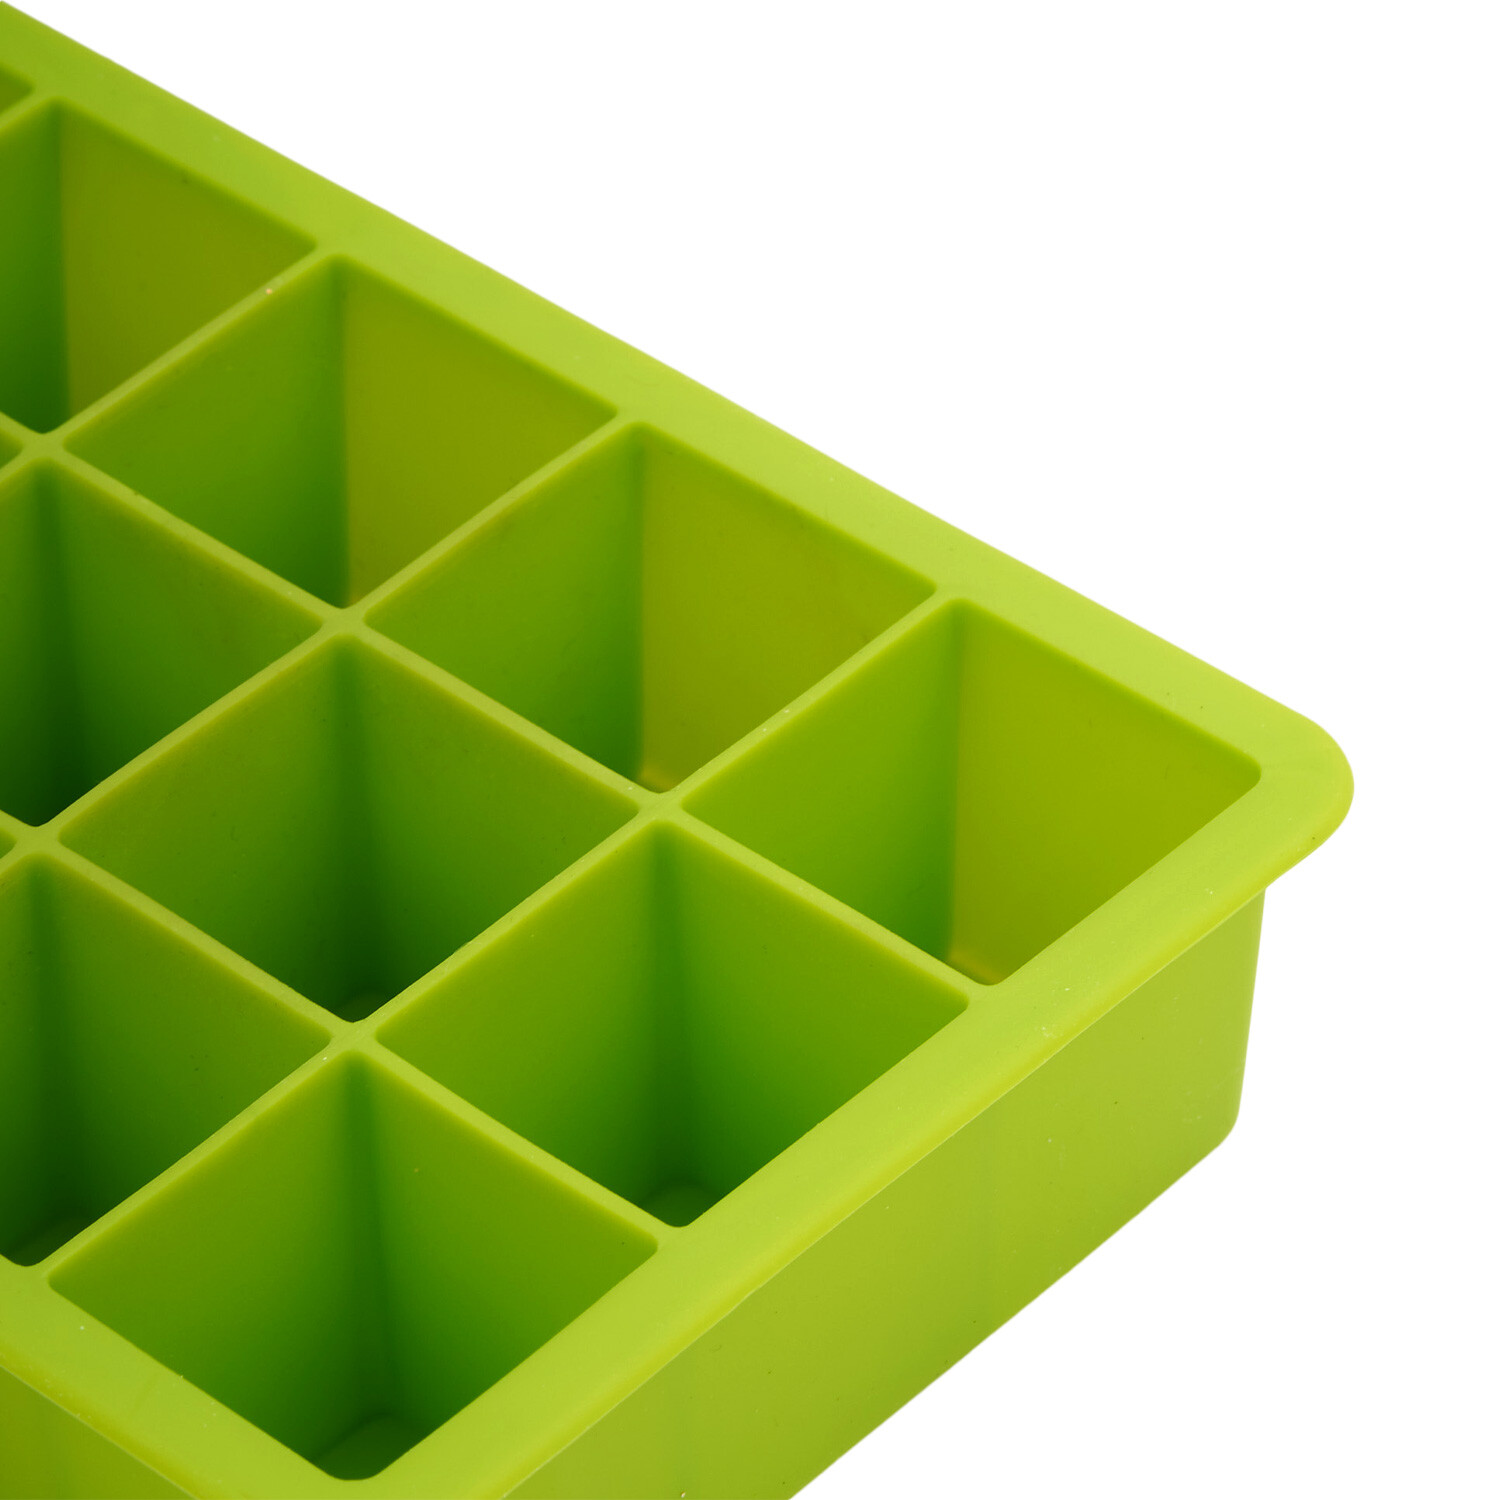 Square Silicone Ice Cube Mould - Green Image 3